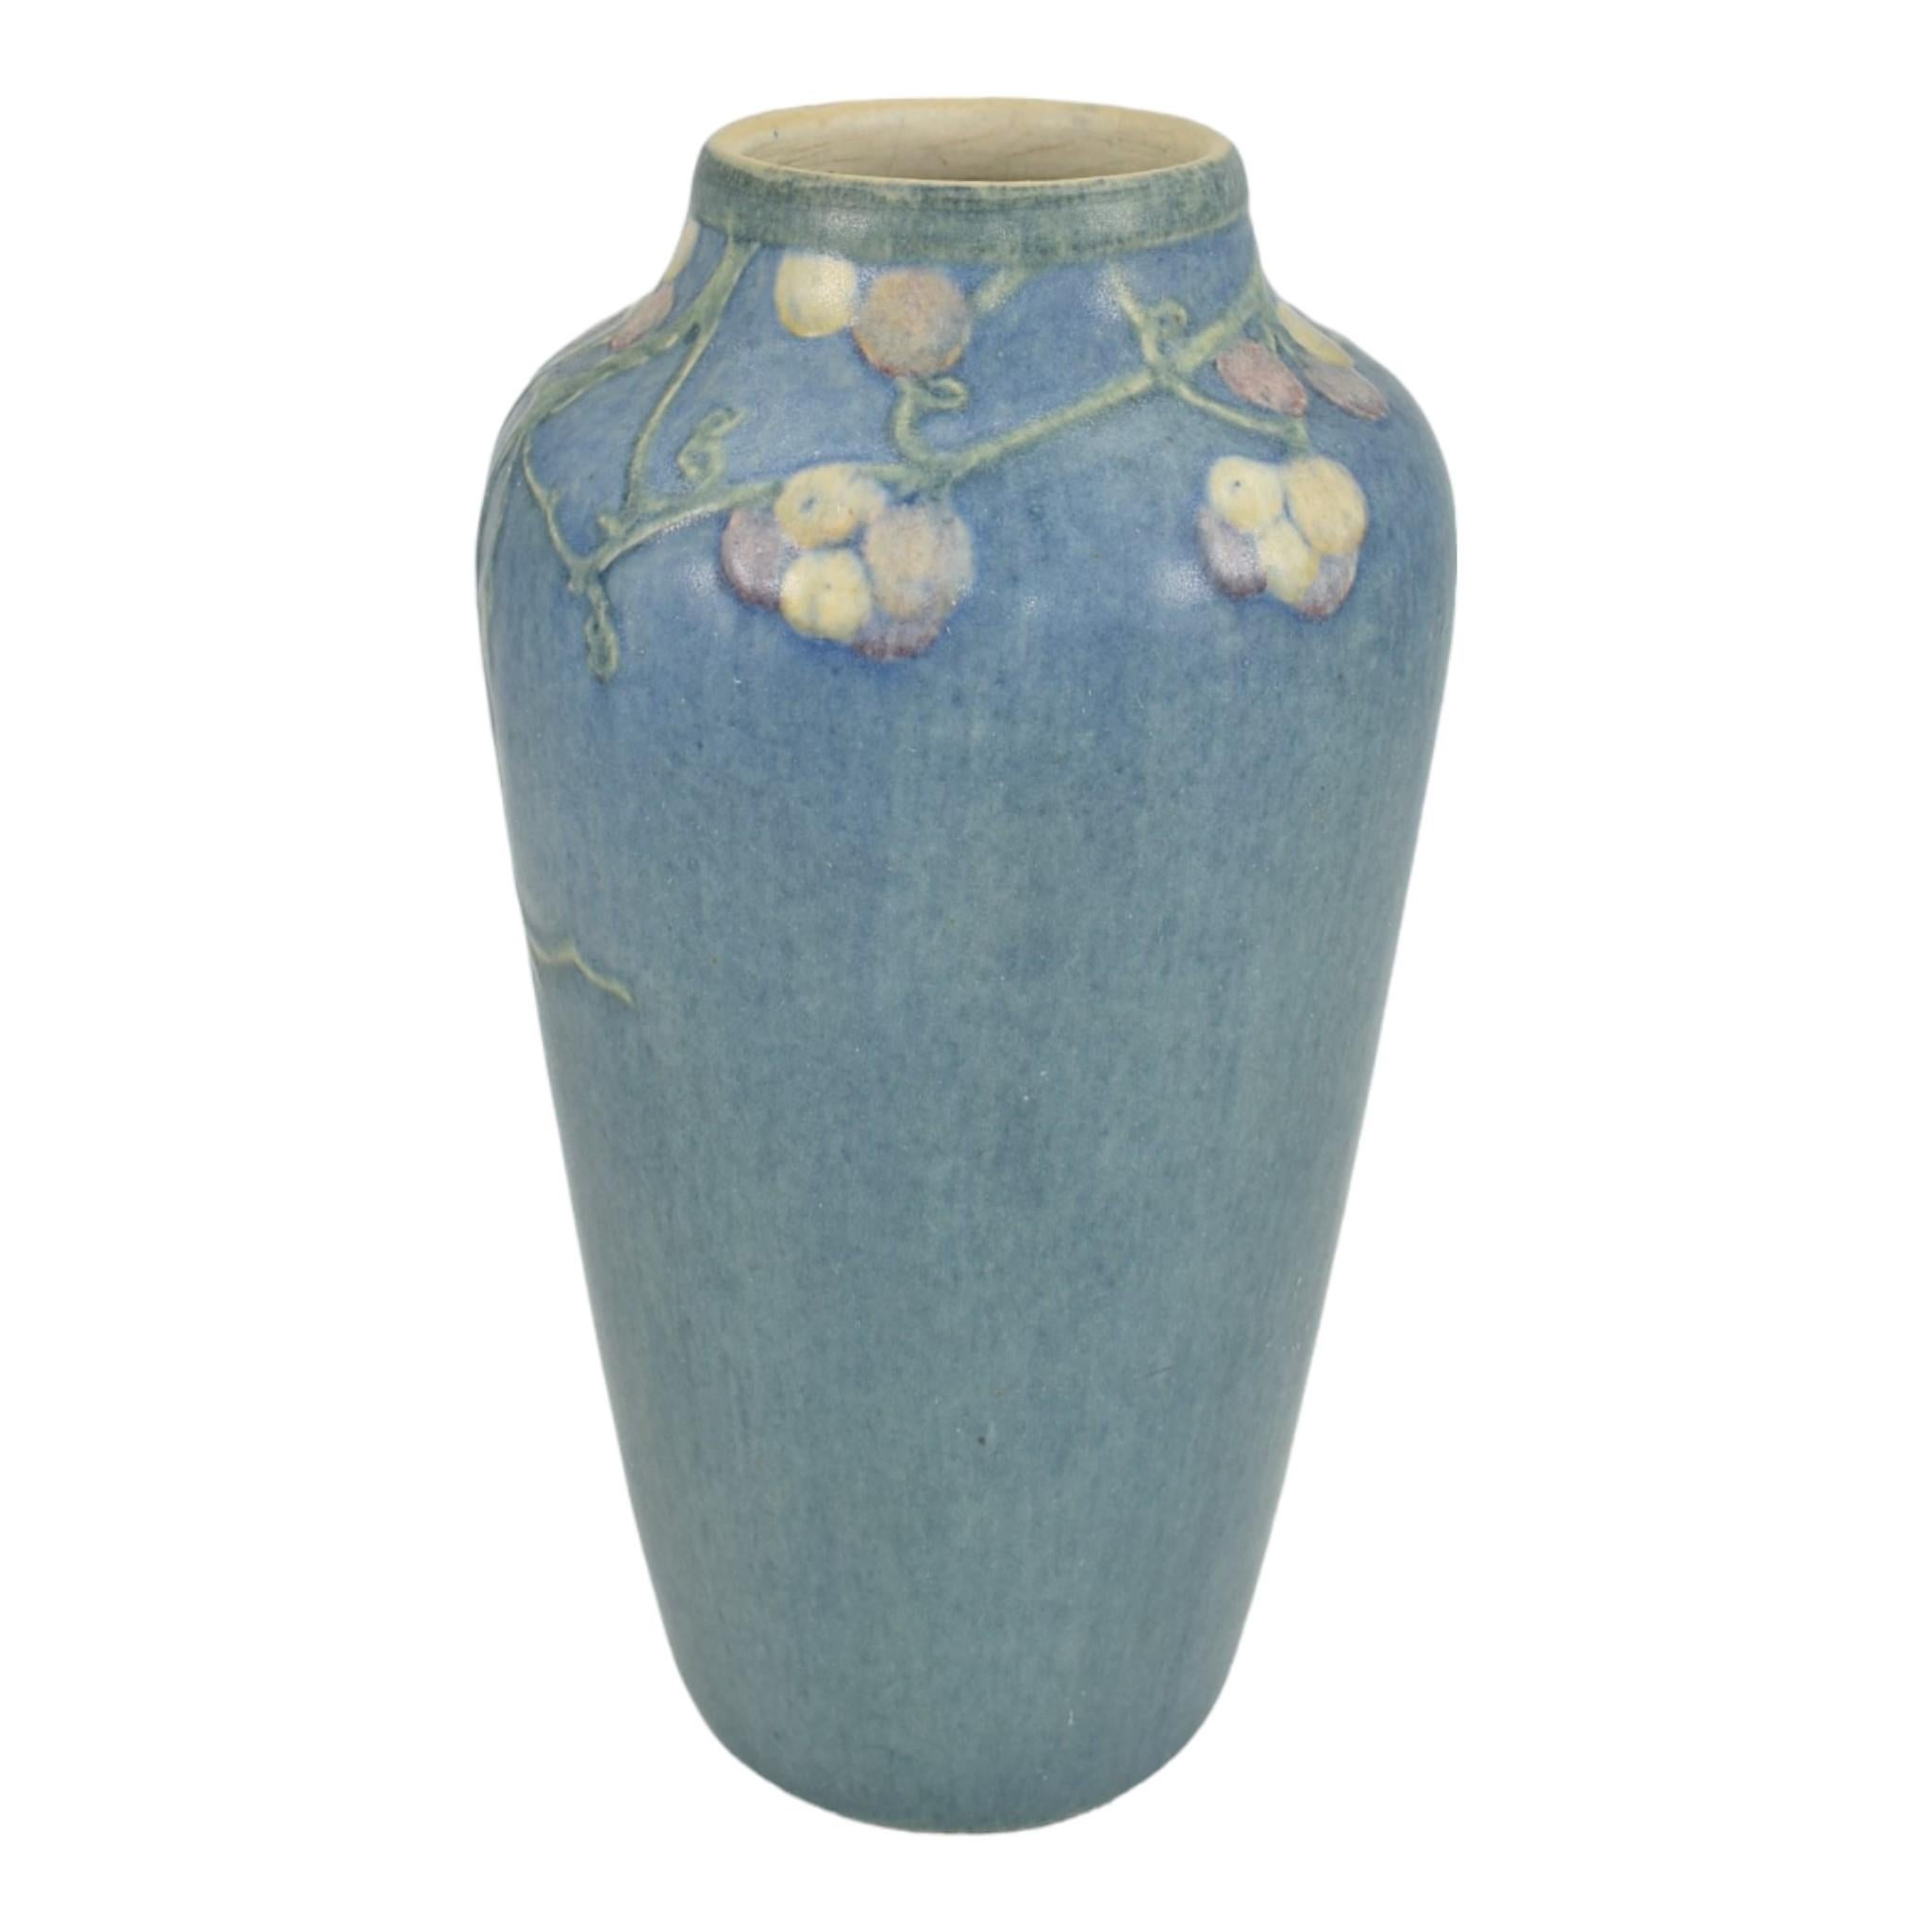 Newcomb College 1915 Arts and Crafts Pottery Pink White Berries Blue Vase Irvine
Lovely blue colors on nice form with a band of hand made and carved colorful berries and vines by Sadie Irvine.
Excellent original condition. No chips, cracks, damage